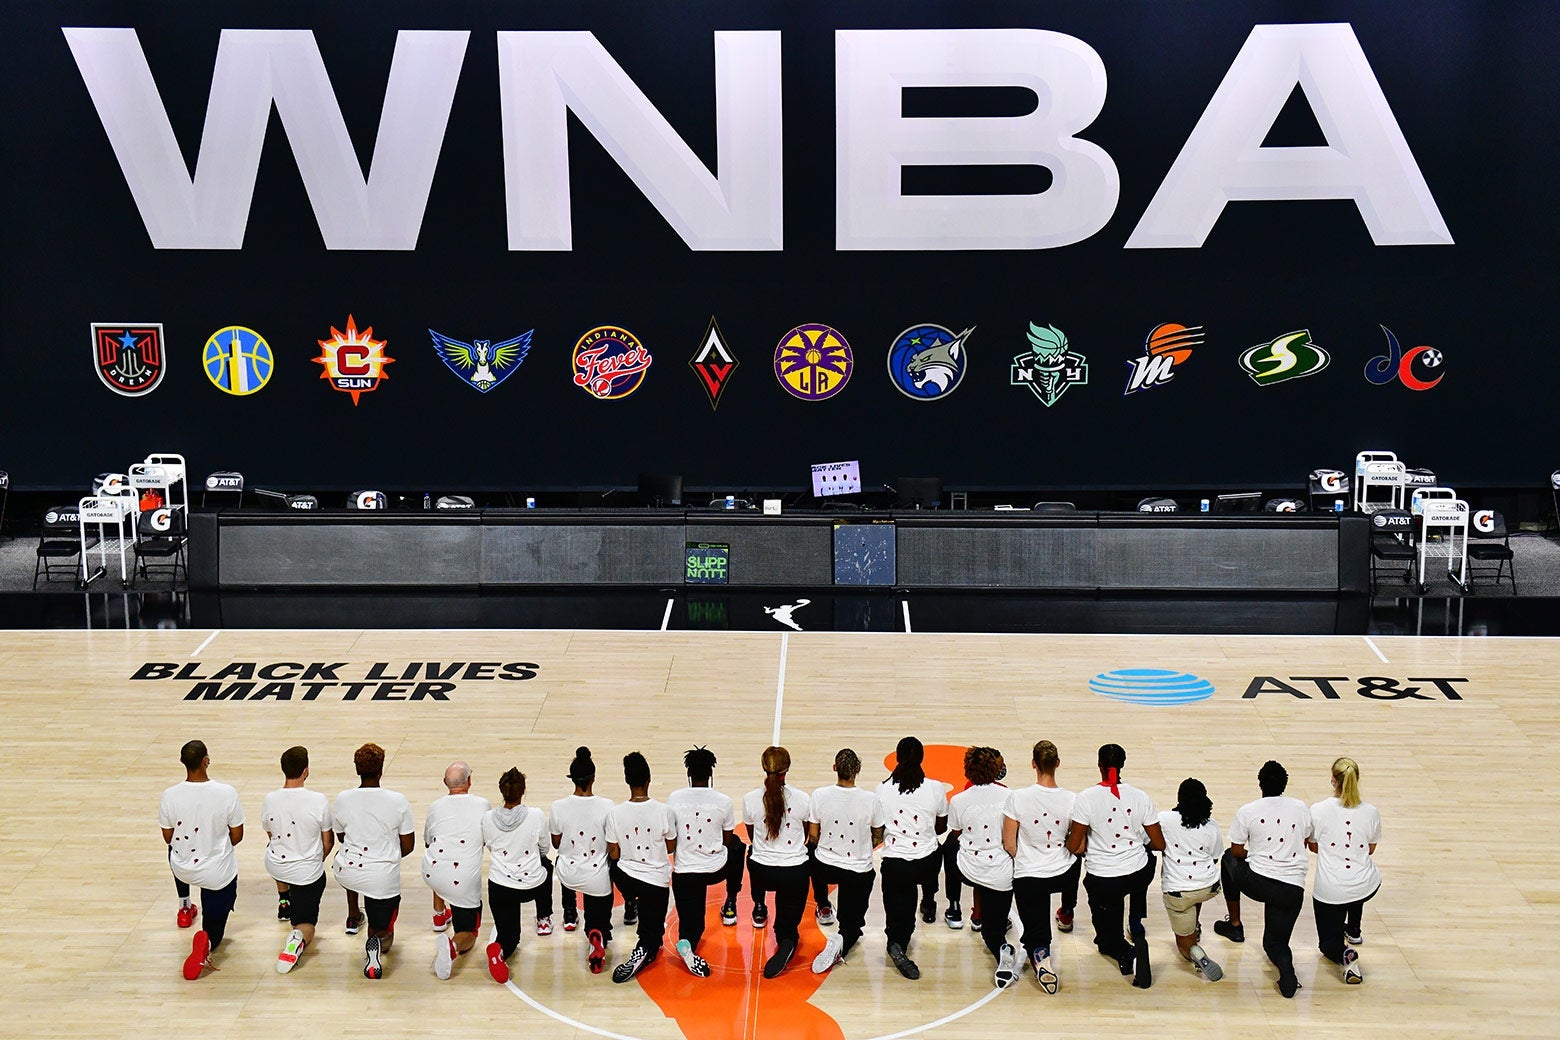 Mystics players wearing protest shirts kneel in a line on a basketball court in front of a big WNBA sign